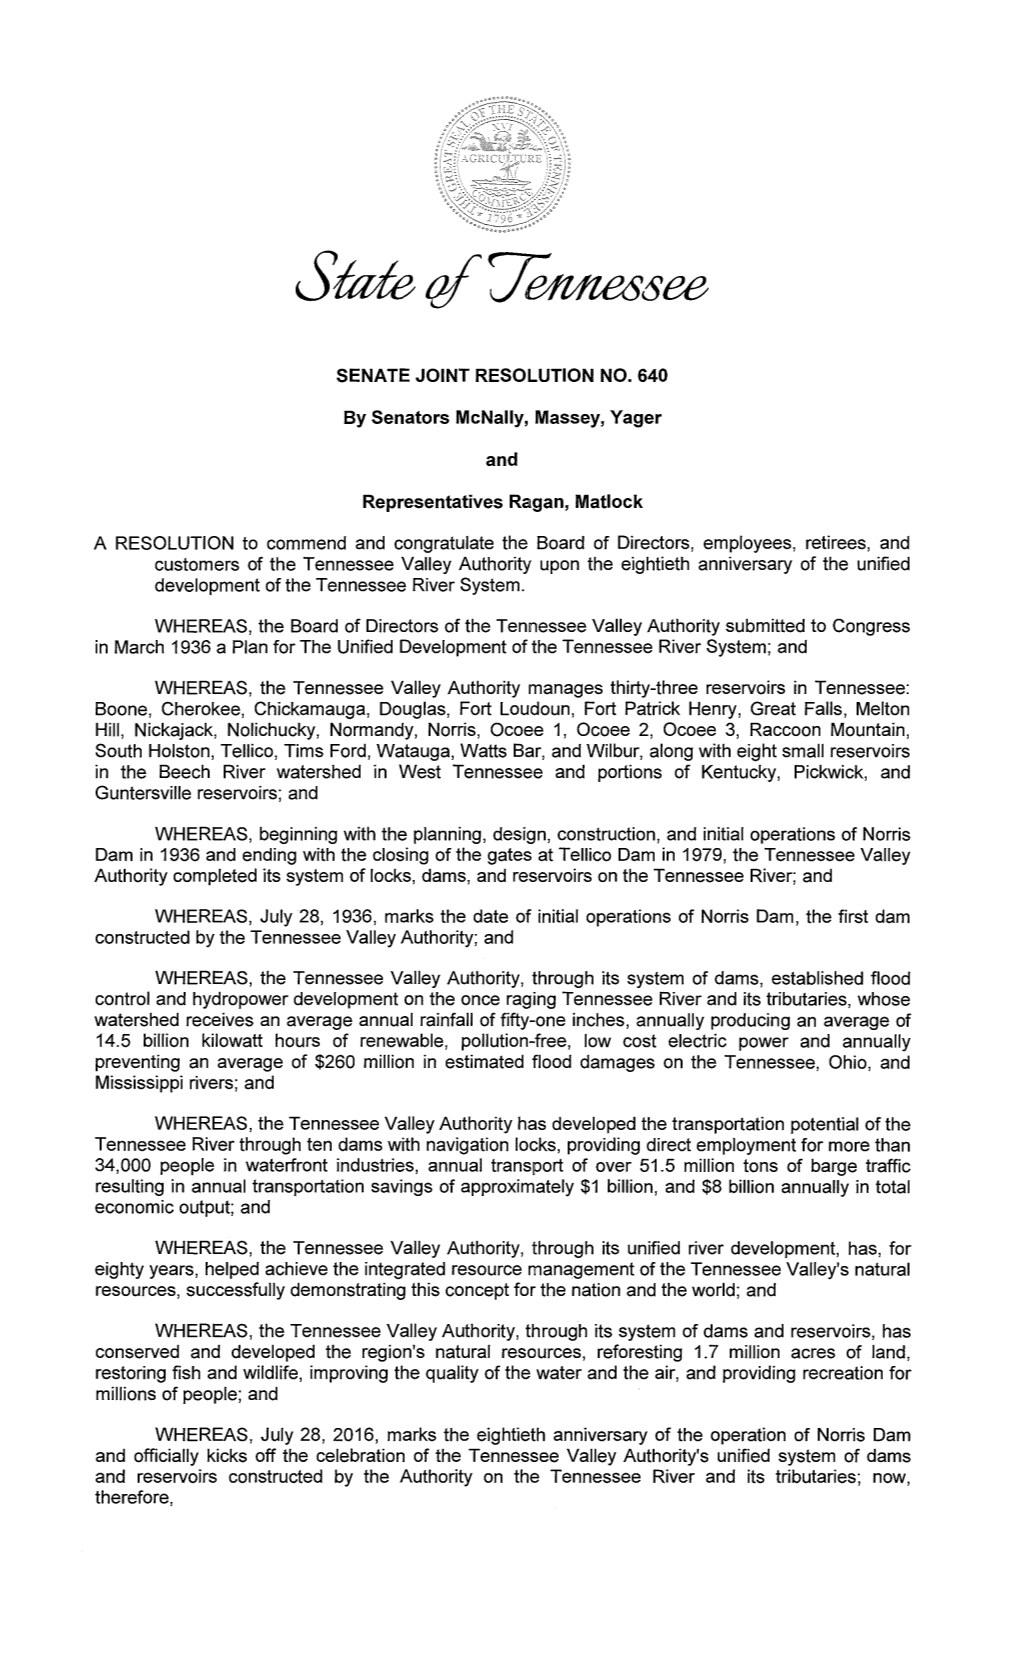 A RESOLUTION to Commend and Congratulate the Board of Directors